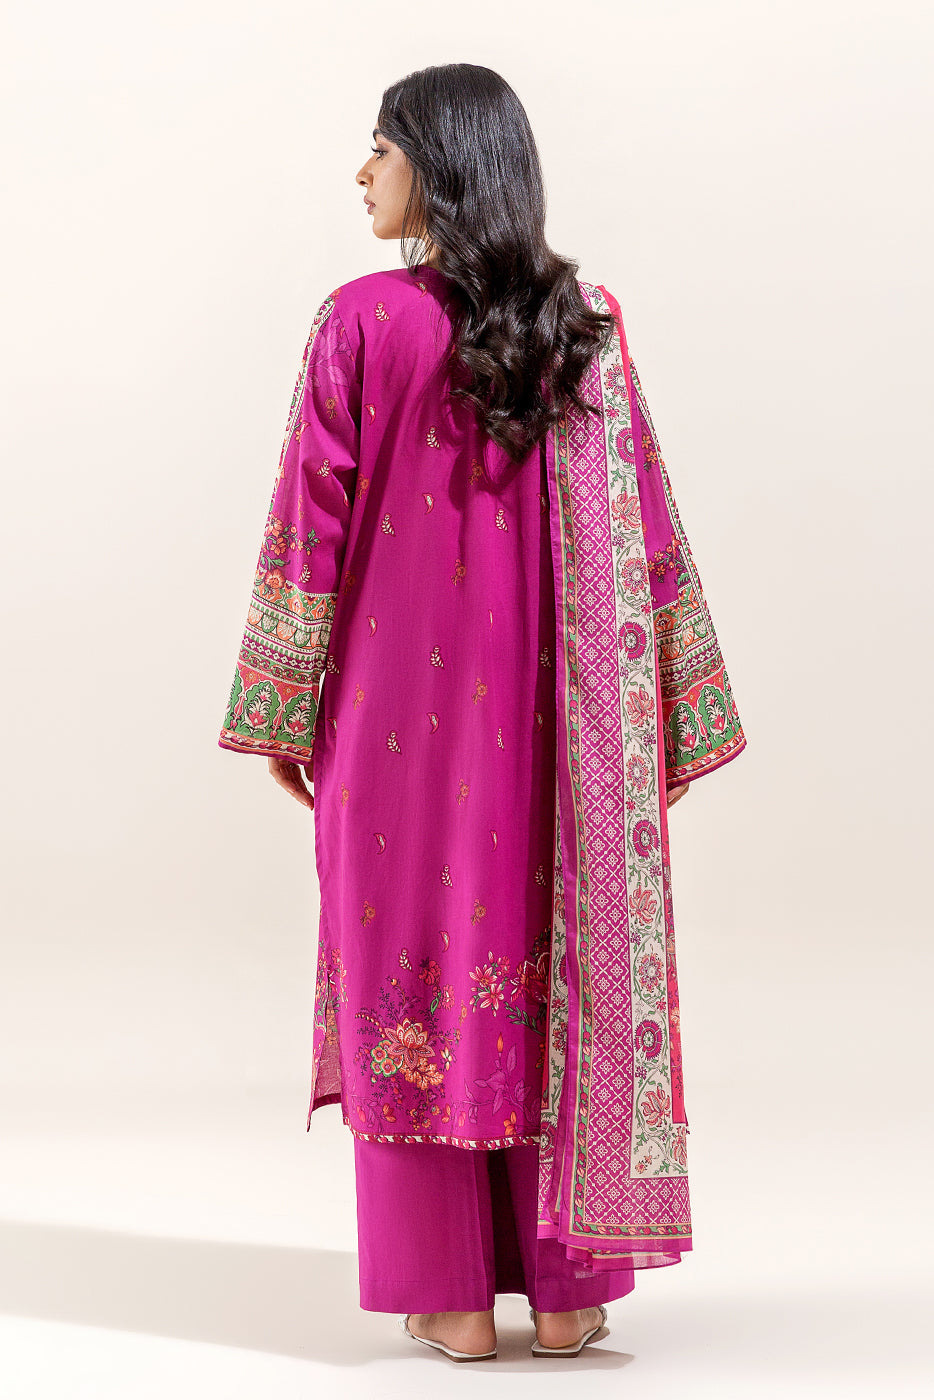 2 PIECE - EMBROIDERED LAWN SUIT - AMETHYST PEACH (UNSTITCHED)